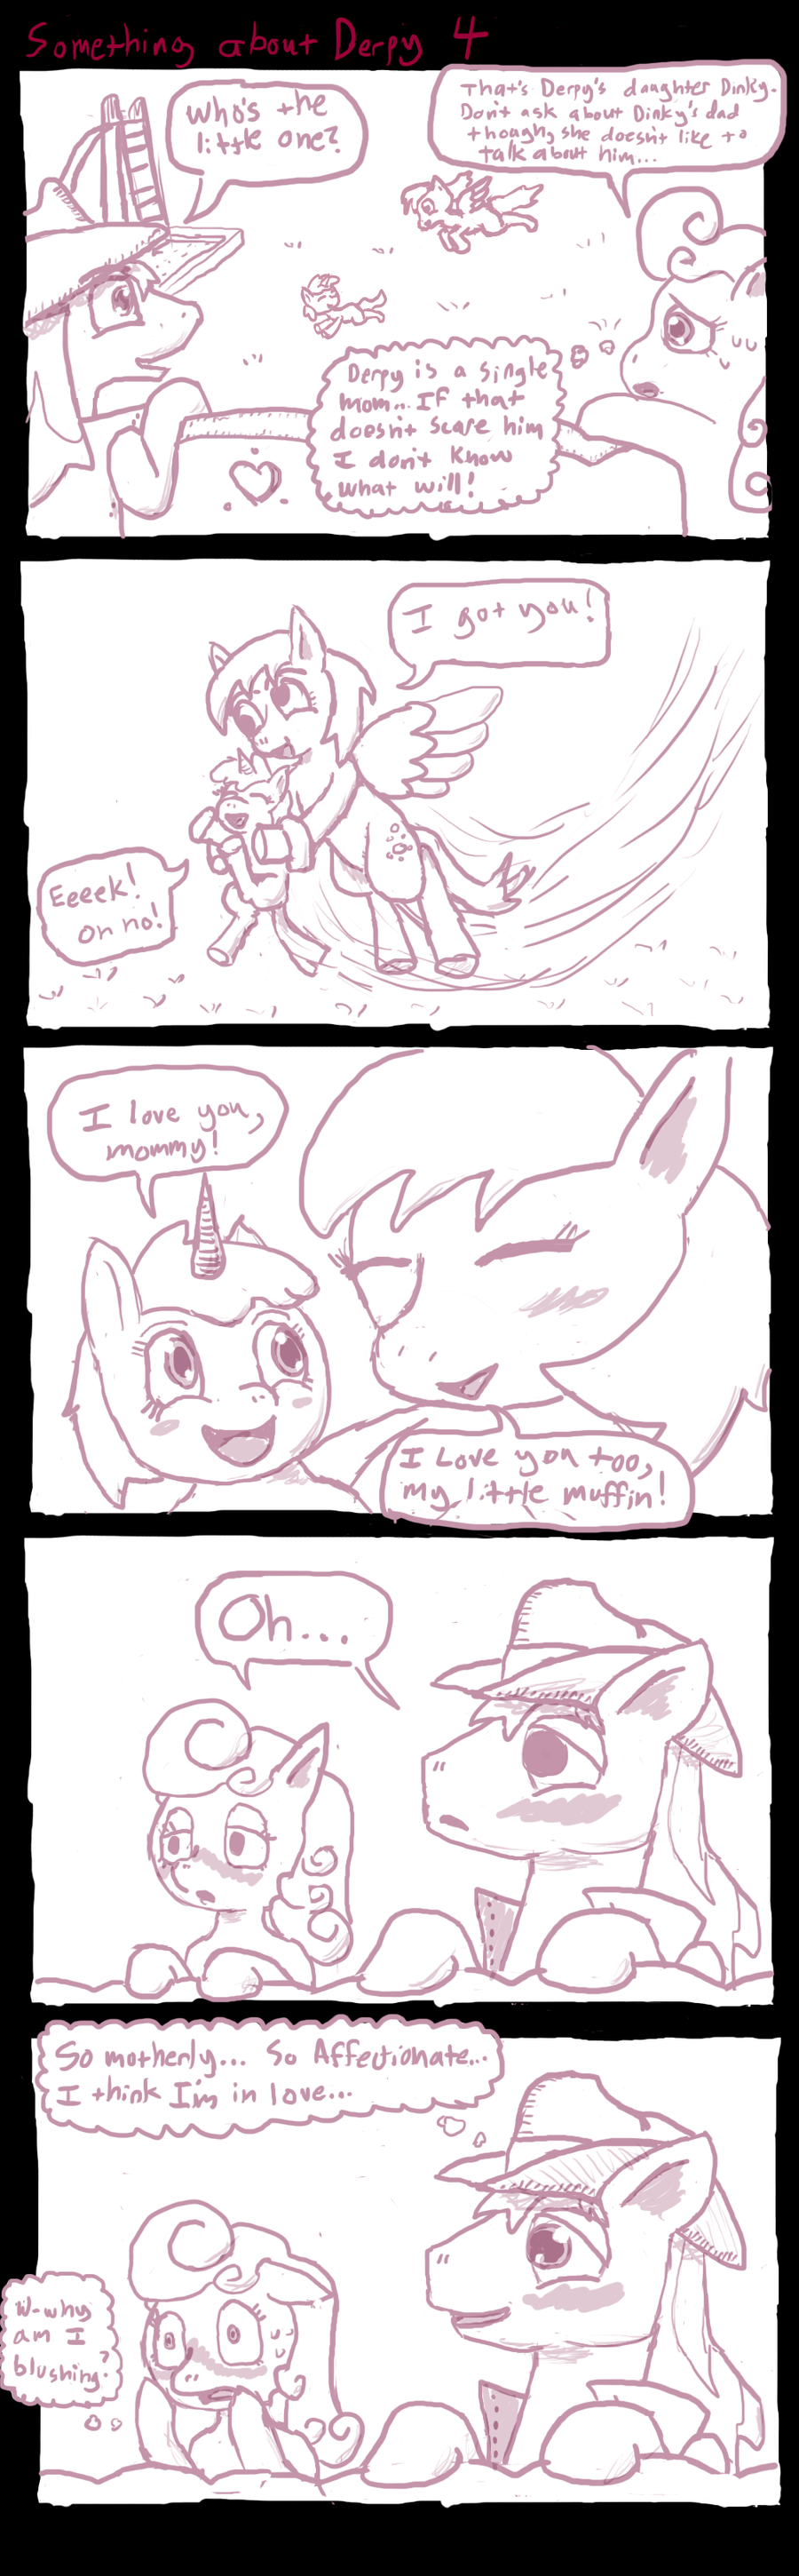 something_about_derpy_4_by_ficficponyfic-d4dzenv.png